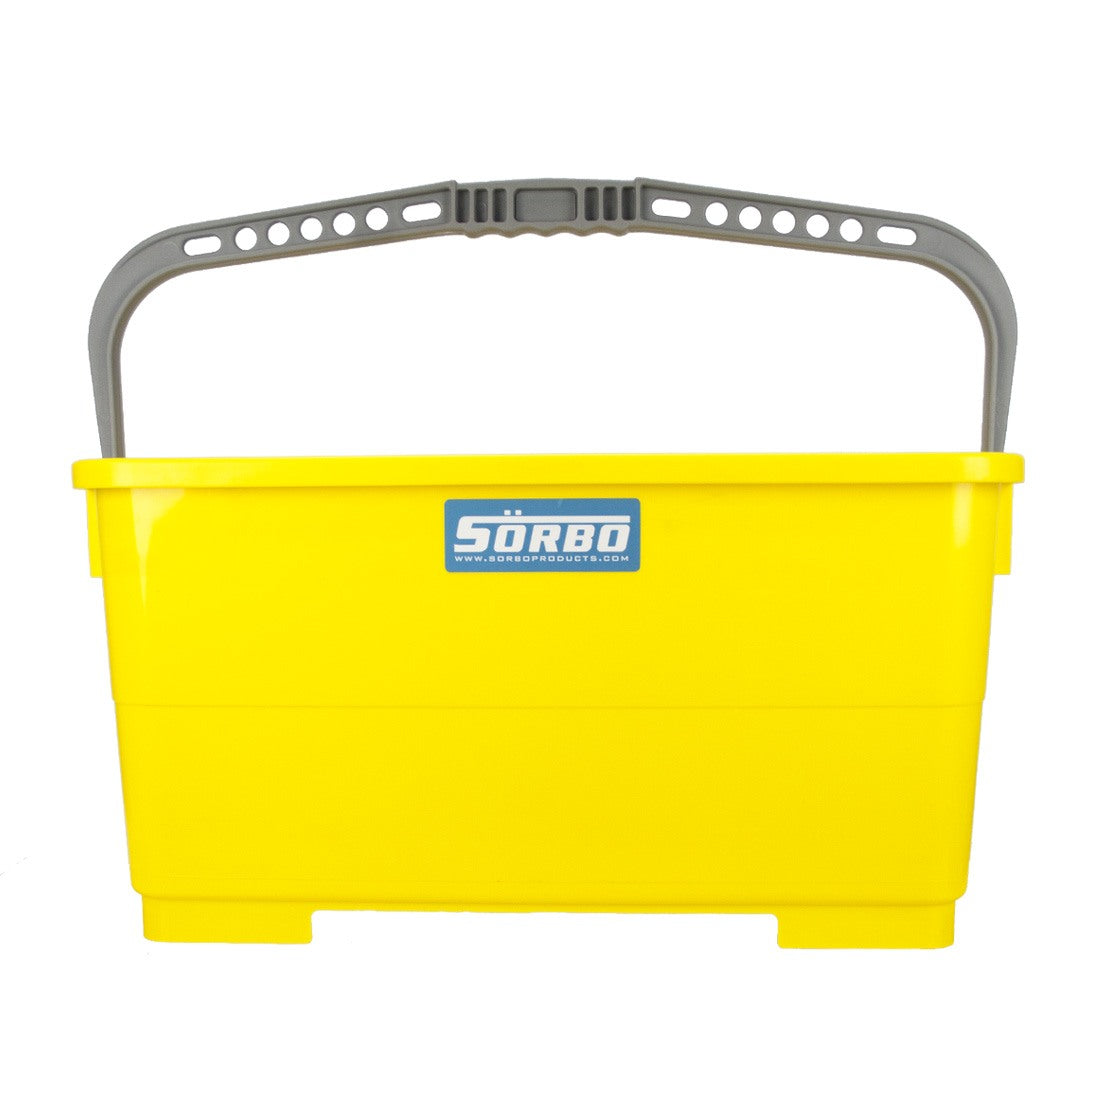 Sörbo Bucket with Clips for Squeegee and Washer for Leif Cart - 18 Inch - Handle Up - Front View